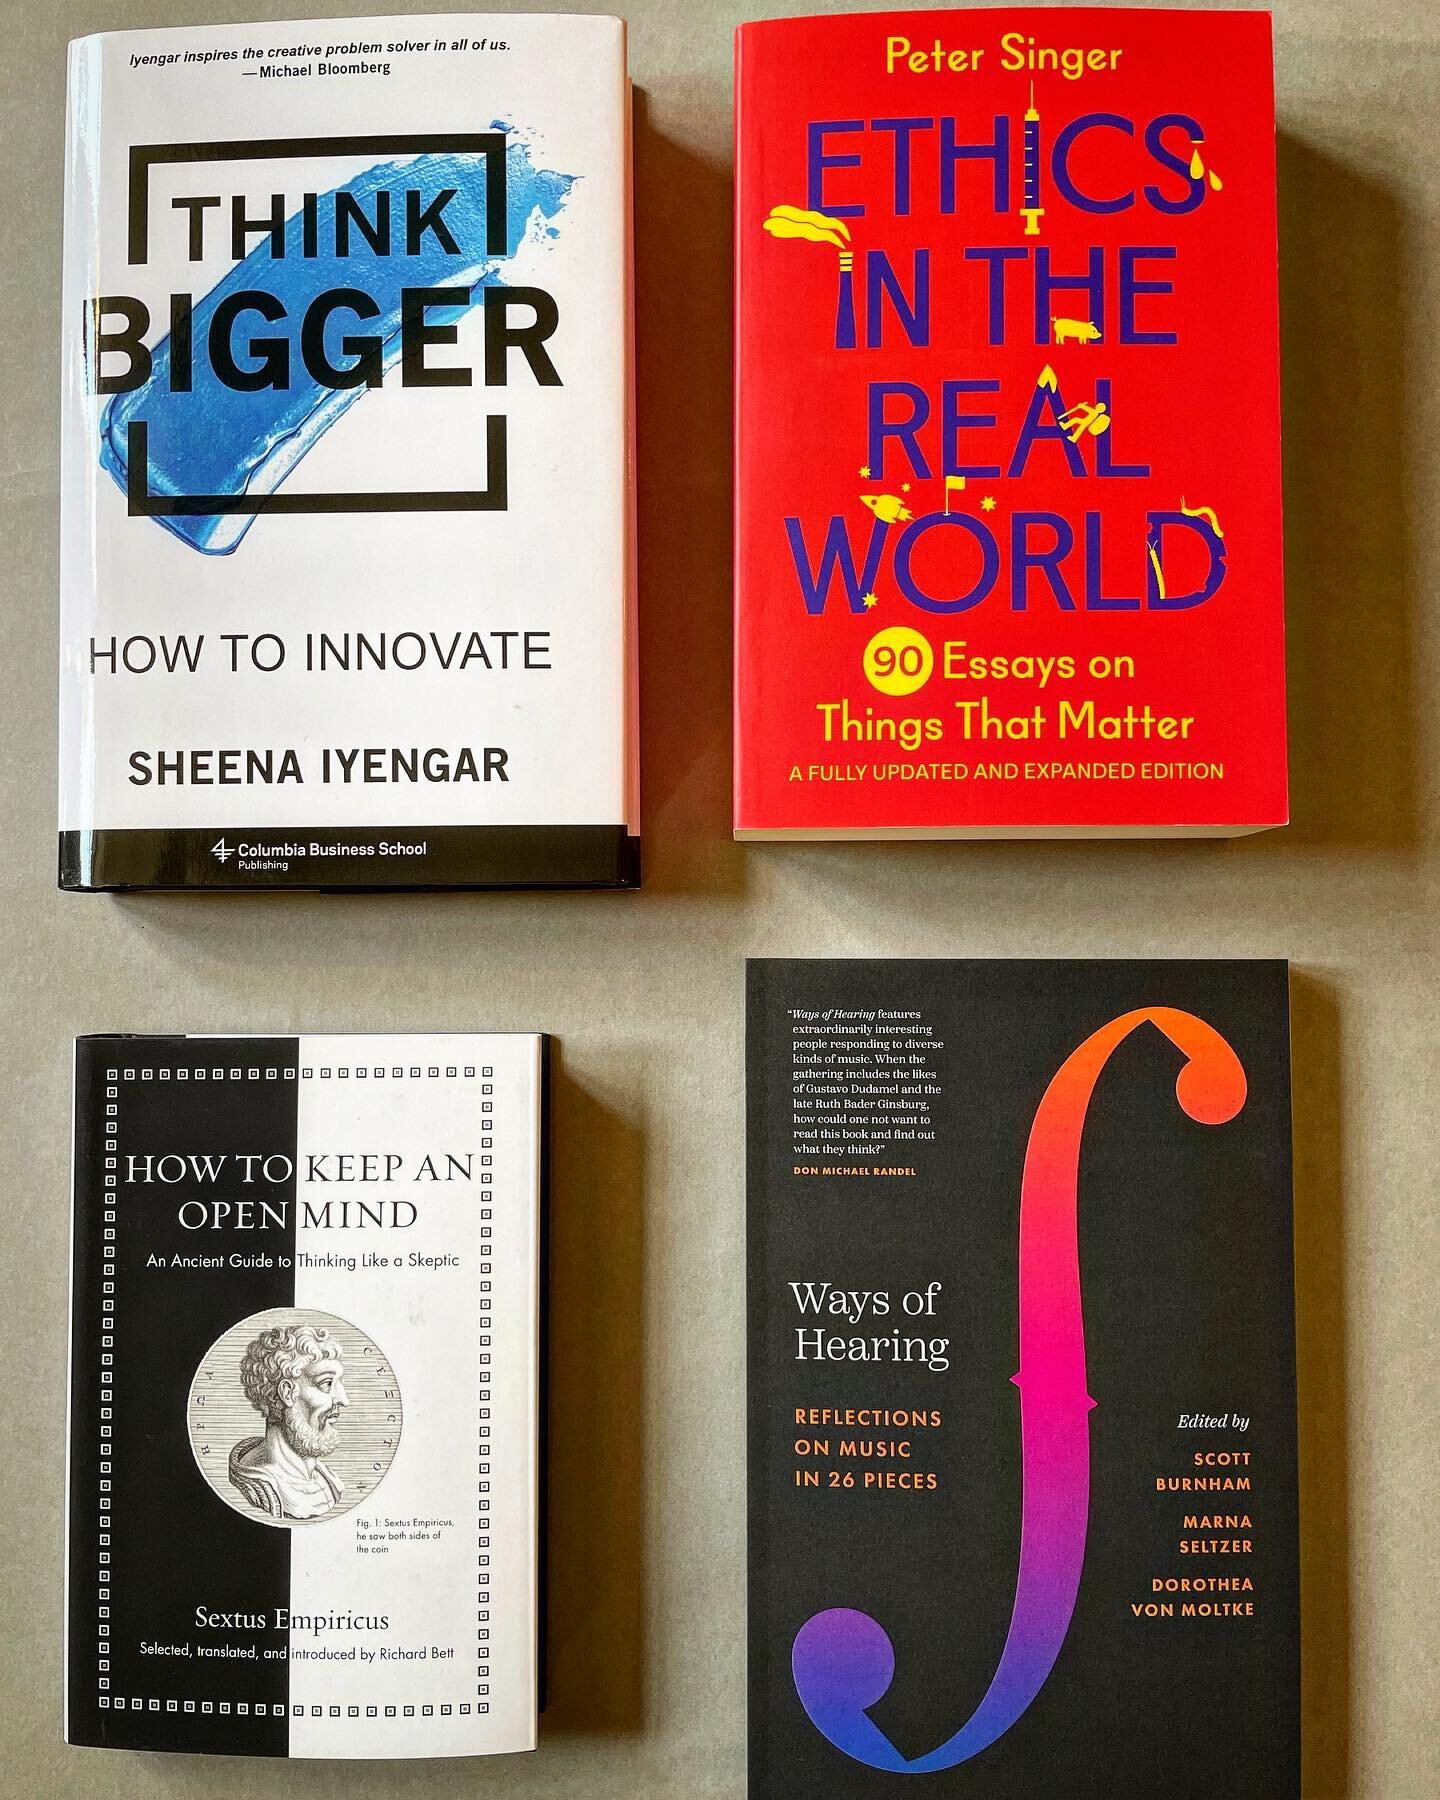 Something to think about&hellip;. 🤔 

&lsquo;Think bigger&rsquo;
Offers an innovative evidence-backed method for generating big ideas and upends the myth that big ideas are reserved for a select few. 💡 

&lsquo;Ethics in the Real World&rsquo;
A Ful